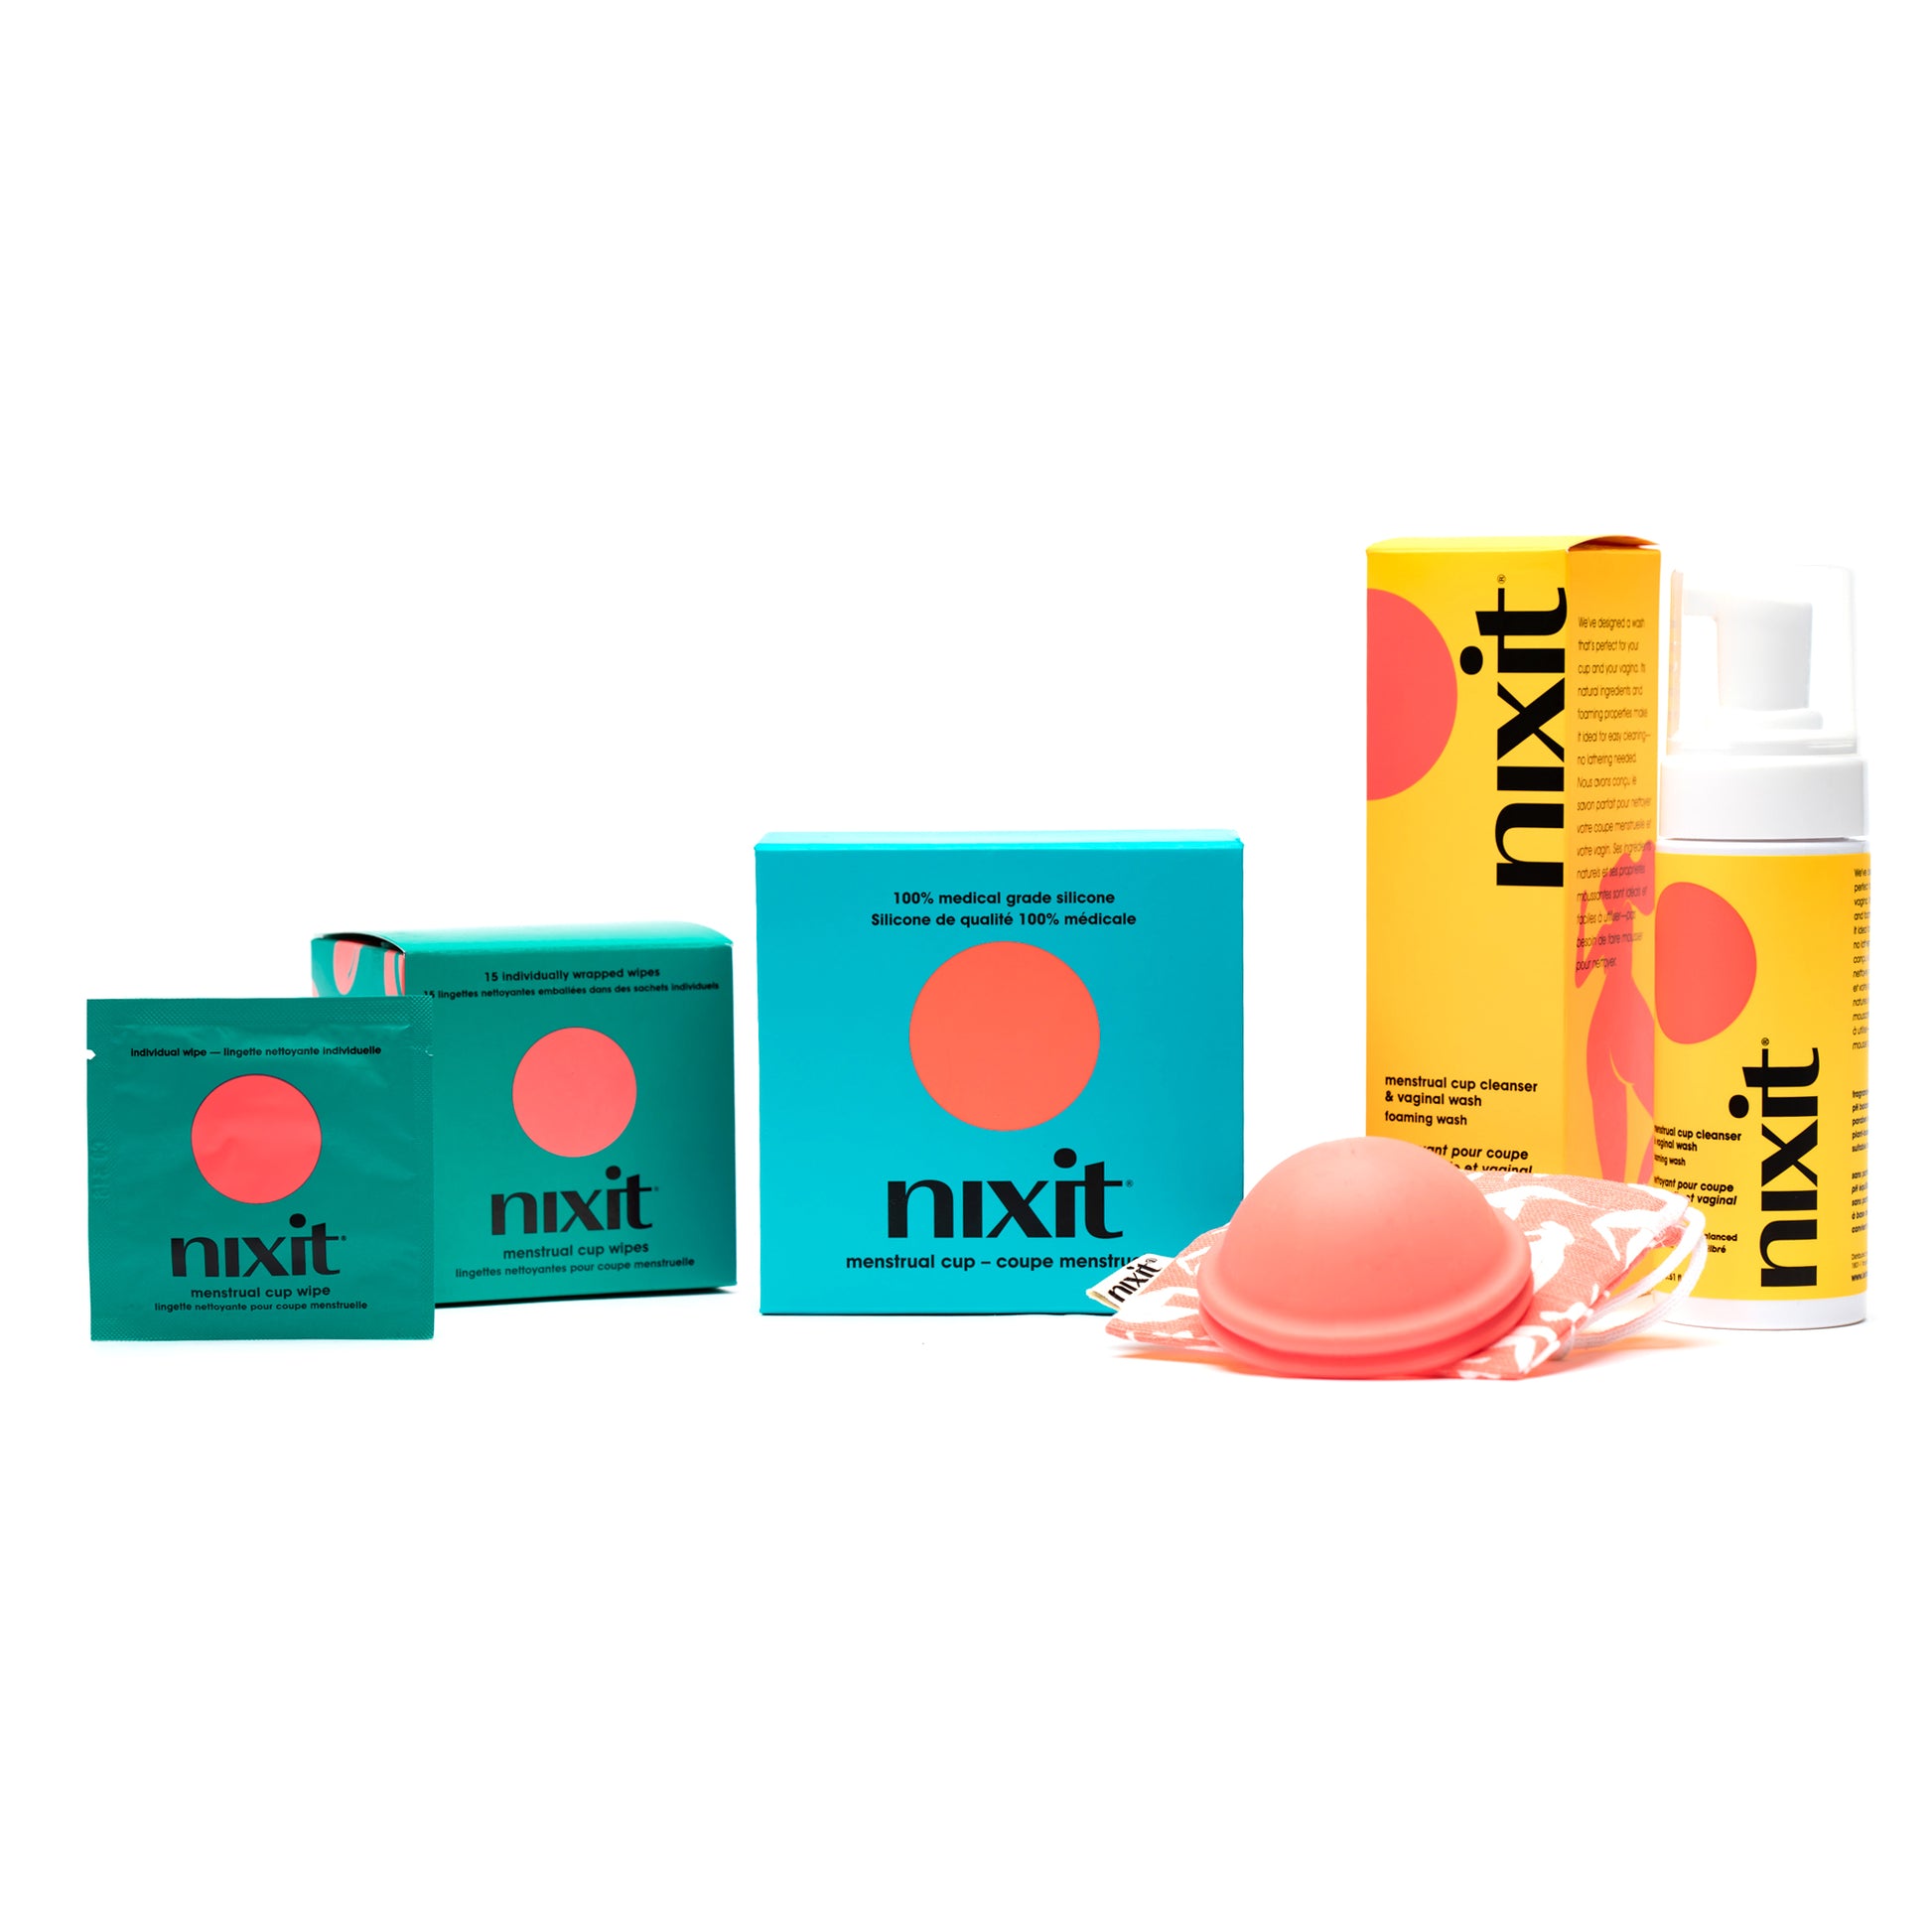 nixit menstrual cup on Instagram: Anyone else have our starter bundle on  their wishlist this year? 🙋‍♀️🎁 . . . . . #wishlist #periodcomfort  #letsnixit